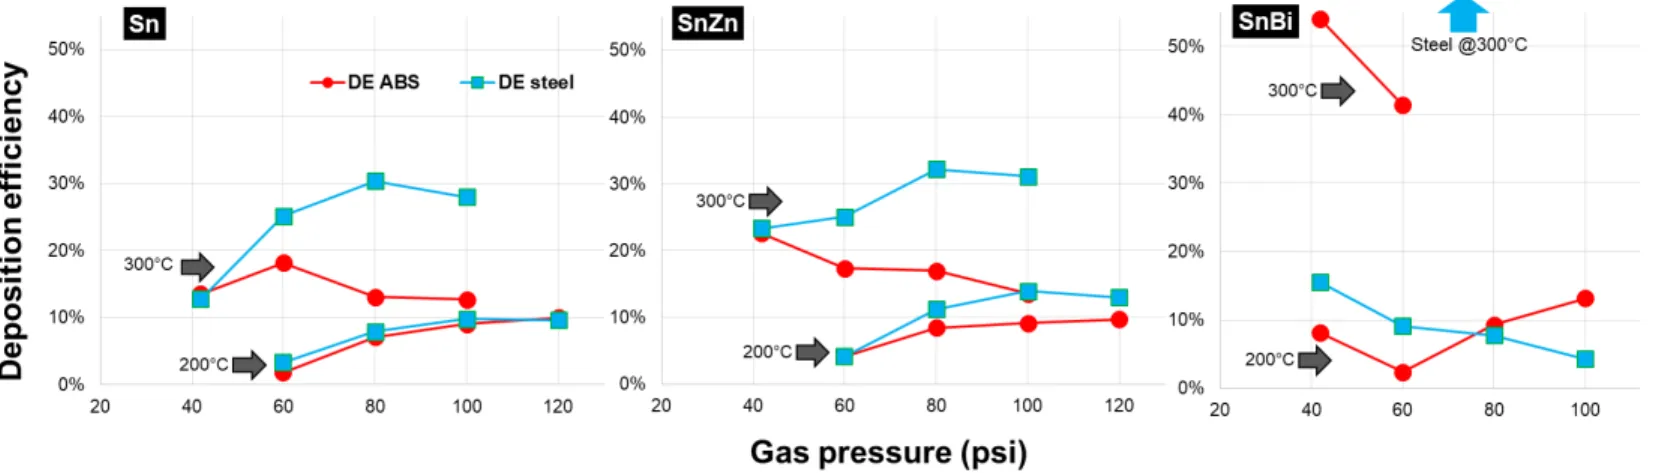 Figure 2: DE of Sn, SnZn, and SnBi cold sprayed at 200°C and 300°C on ABS and steel as a function of gas pressure